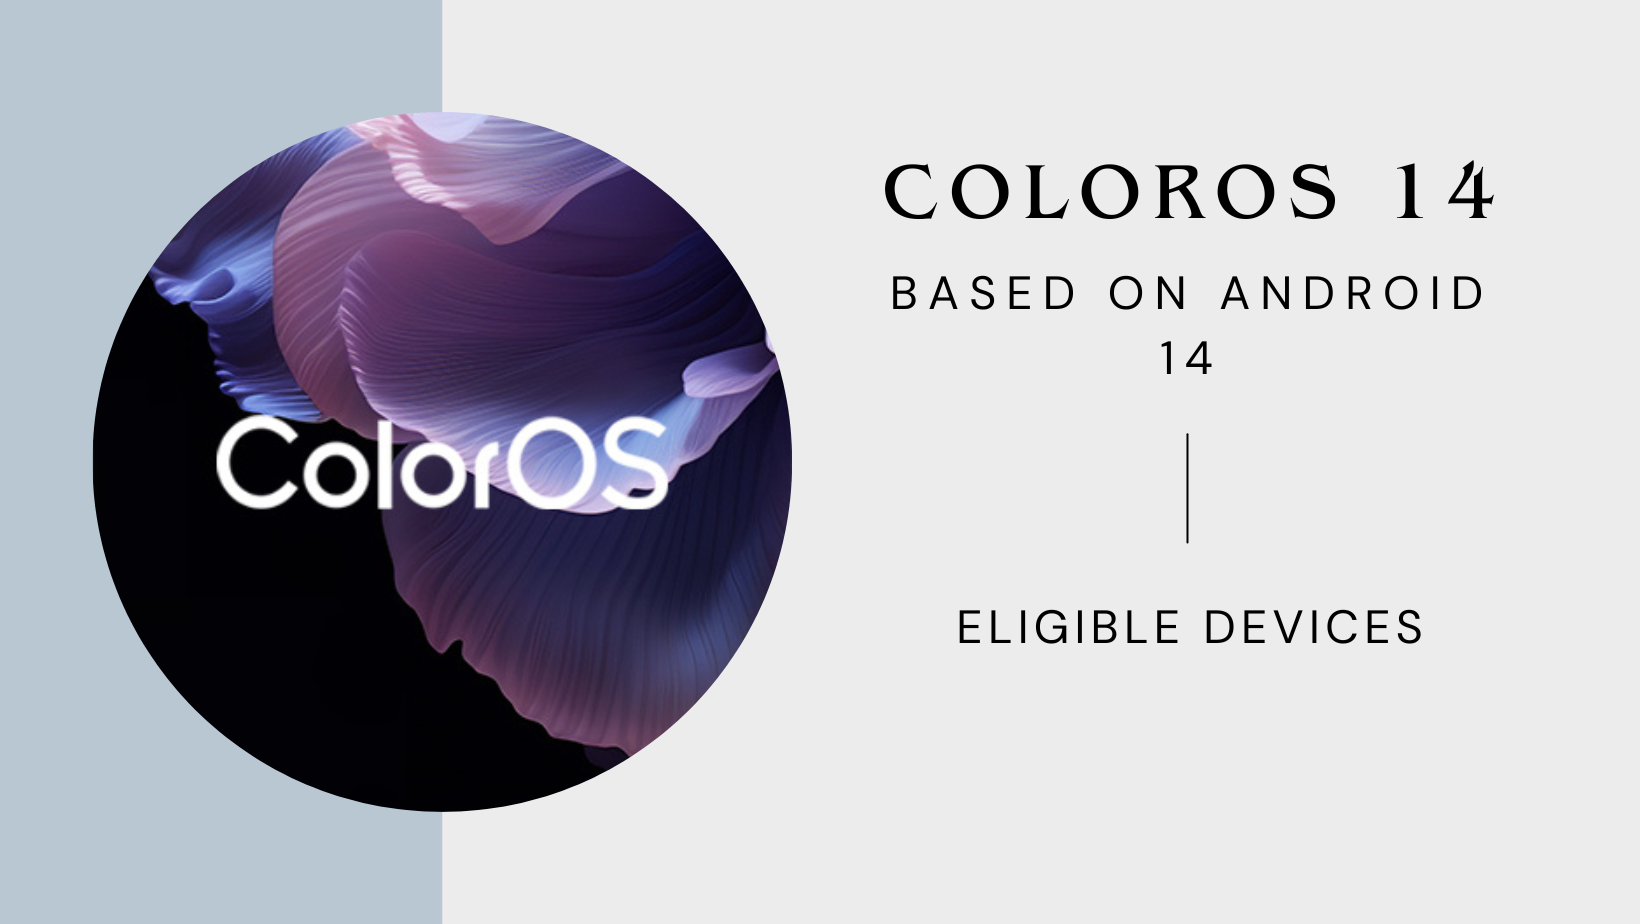 oppo phones eligible for coloros 14 based on android 14 - the go android